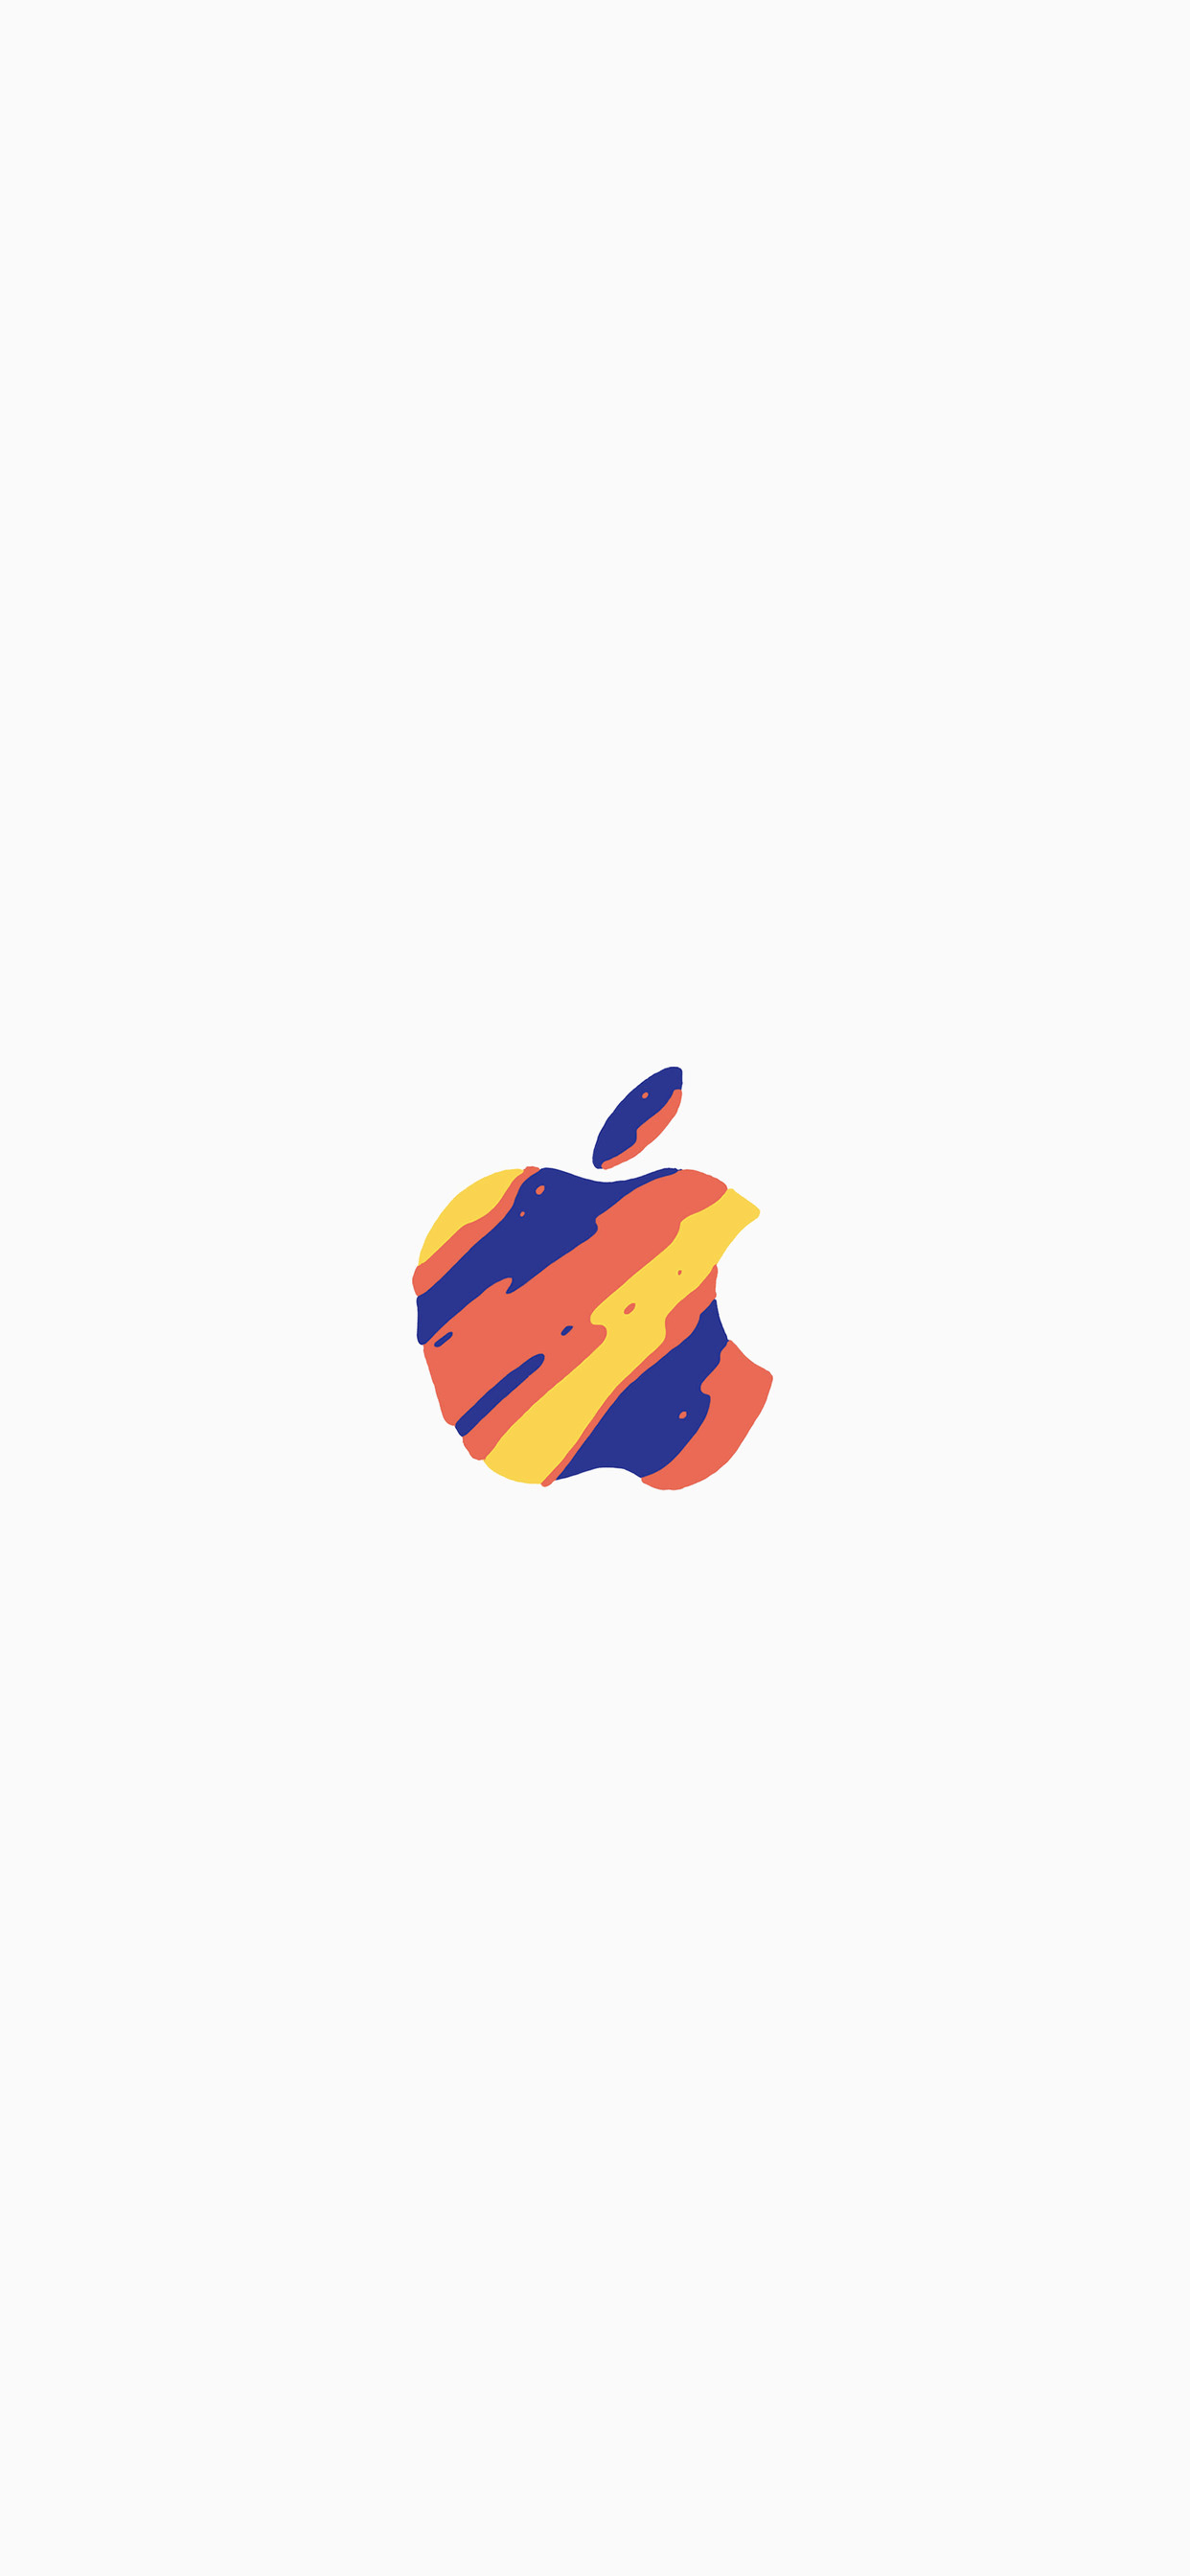 2018 Apple Logo - There's more in the making: 33 Apple logo wallpaper